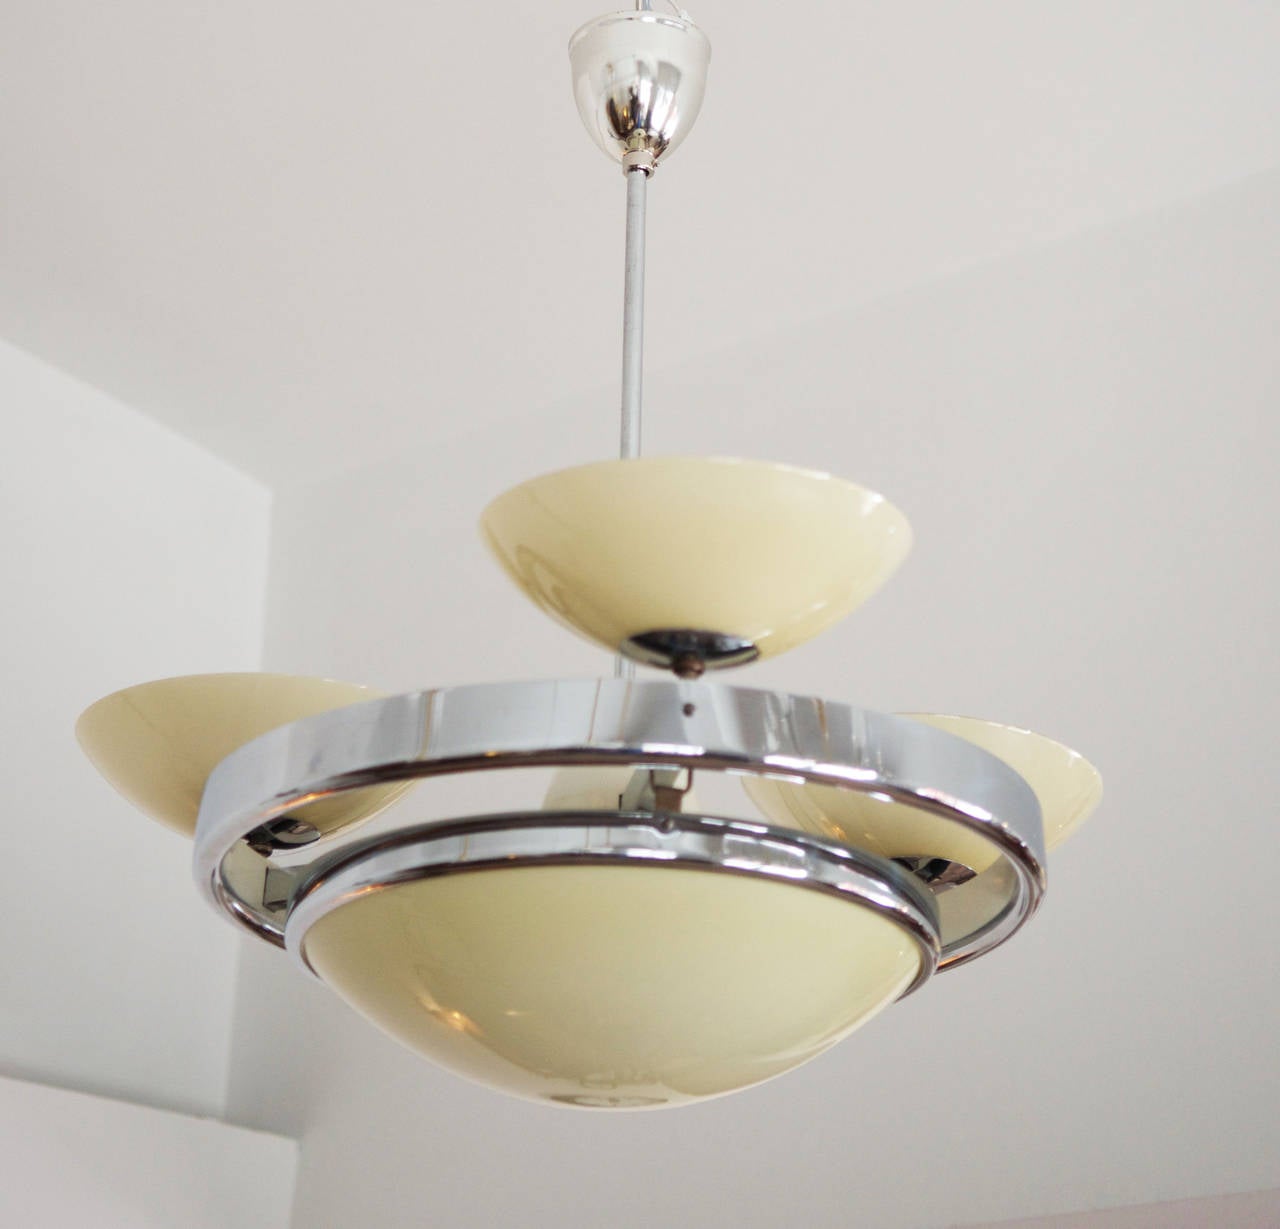 Art Deco Streamline chandelier from circa 1930s.
Chrom-plated steel, opaline glass, new electric with two circuits.
 